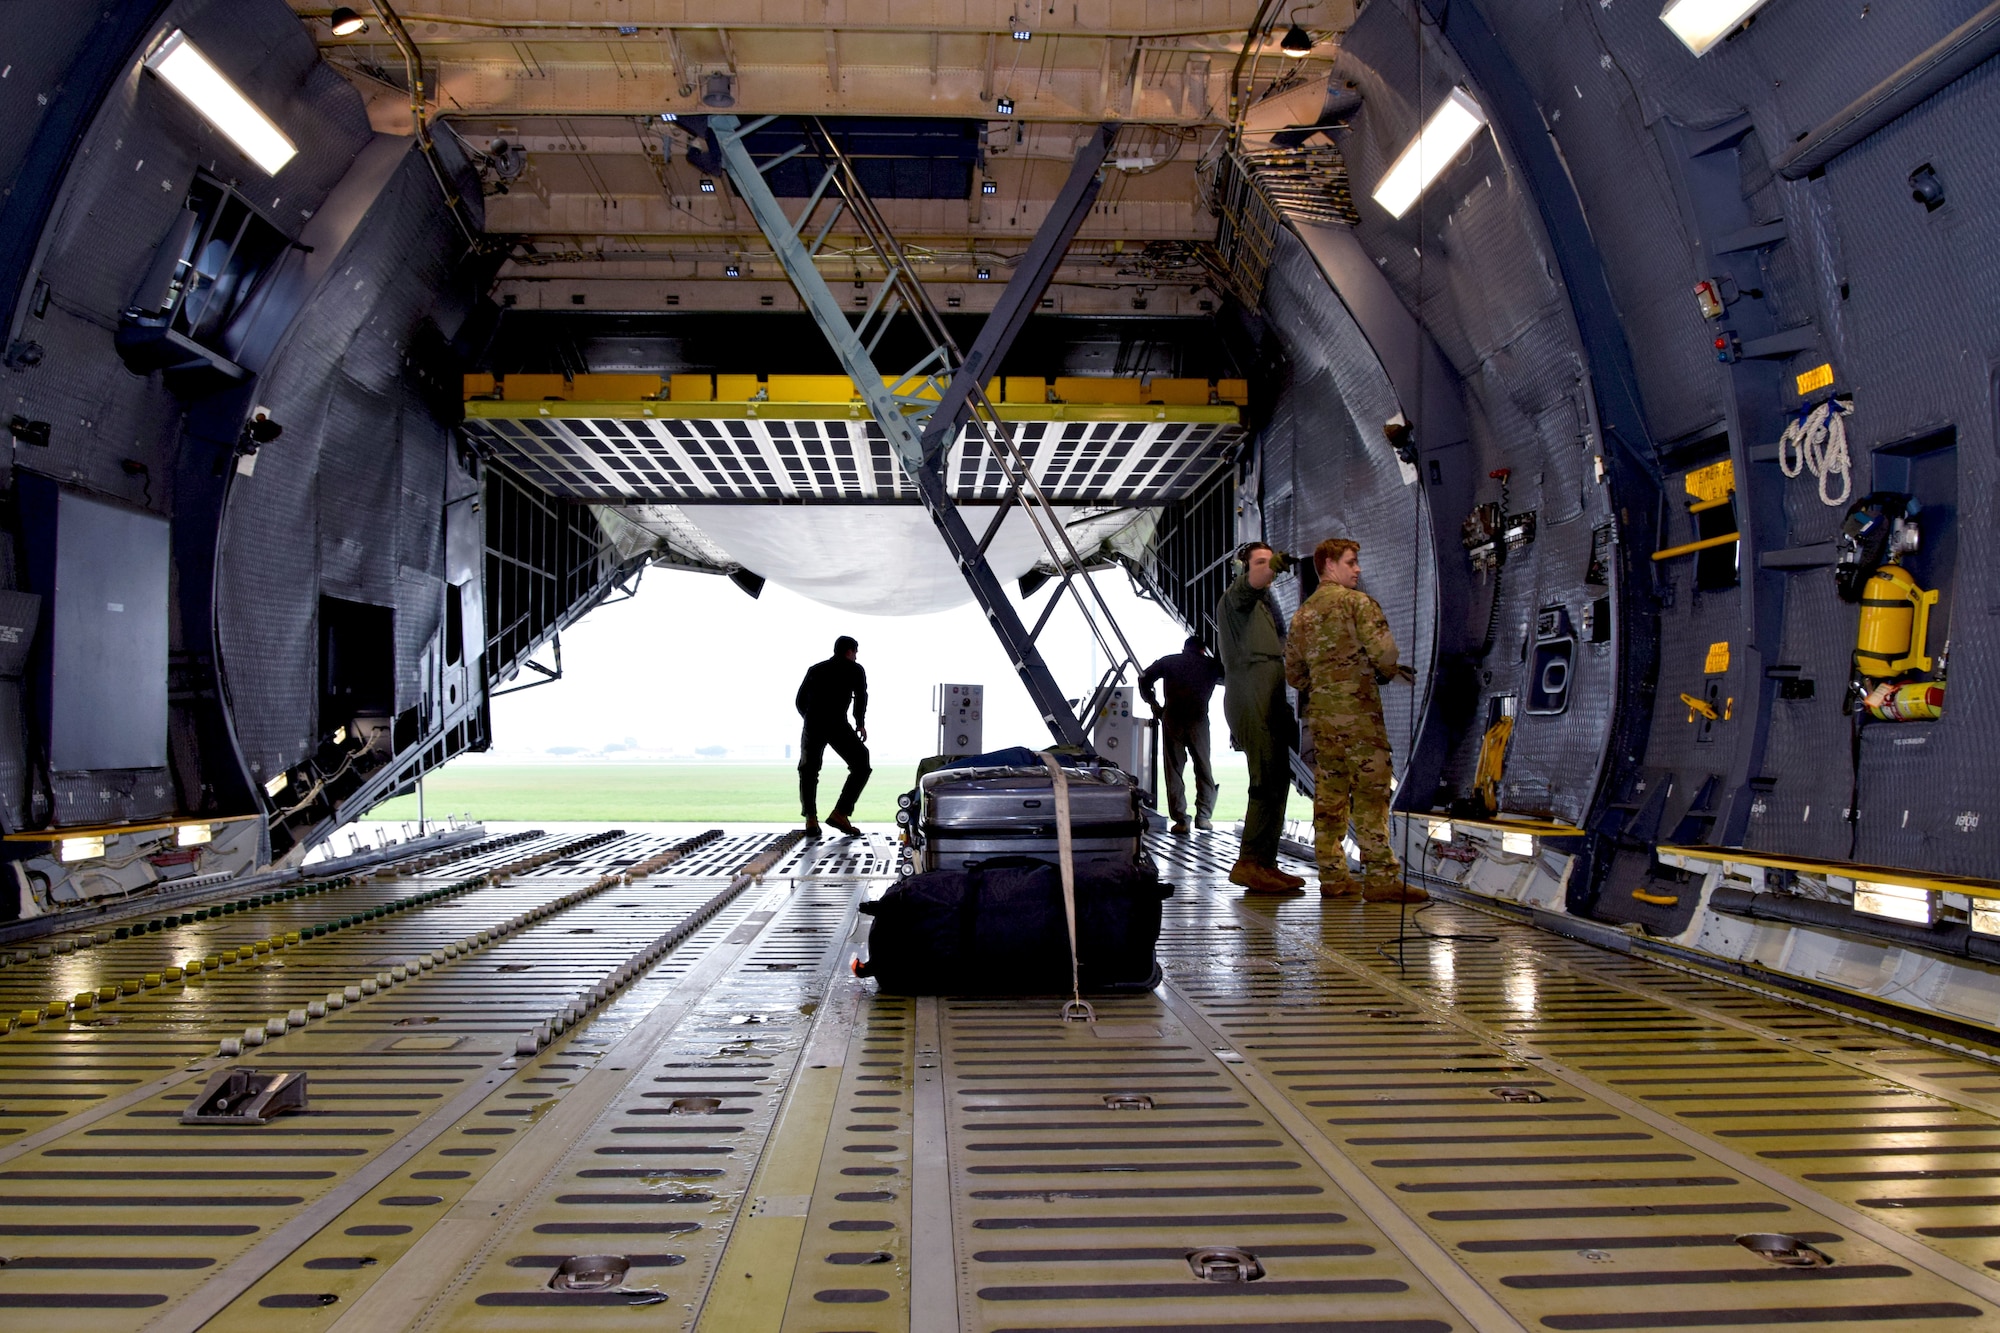 Aircrew members in the 433rd Airlift Wing prepare a C-5M Super Galaxy aircraft at Joint Base San Antonio-Lackland, Texas, for a flight to carry a team of medical technicians mobilized to respond to the COVID-19 crisis April 5, 2020.